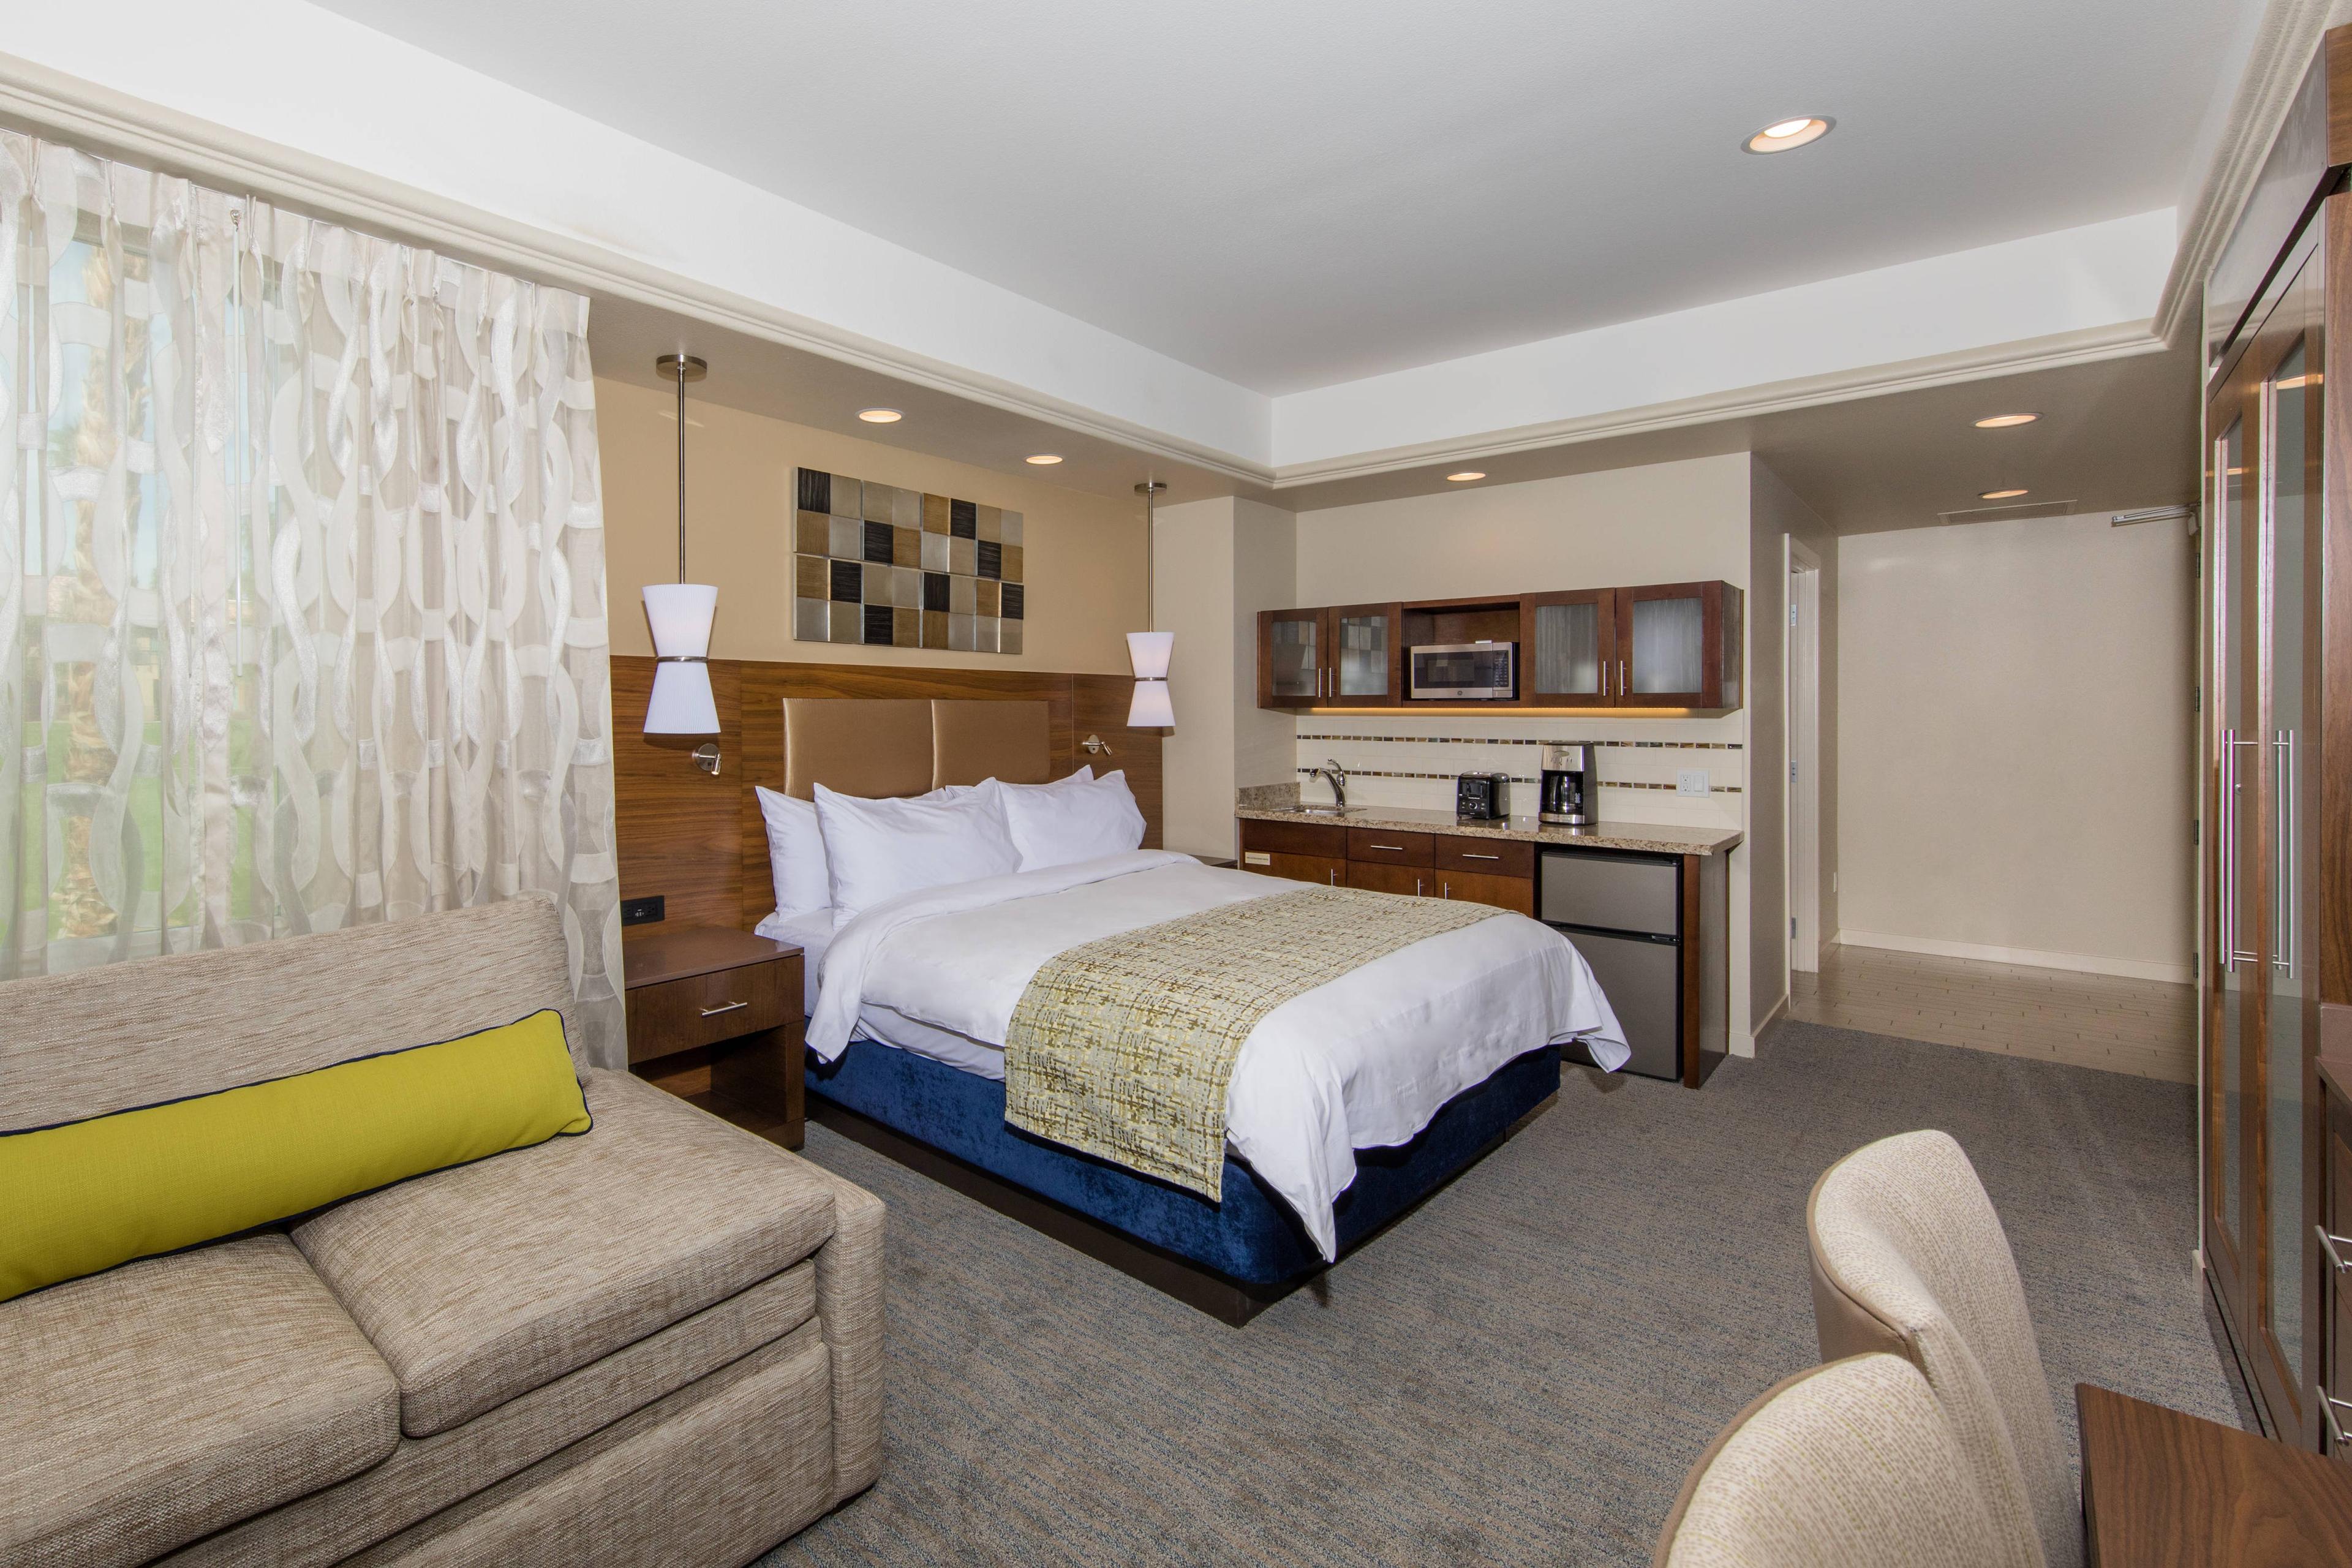 Comfortable guest rooms include a king bed, a sofa bed and a kitchenette with mini refrigerator, microwave and dishware.